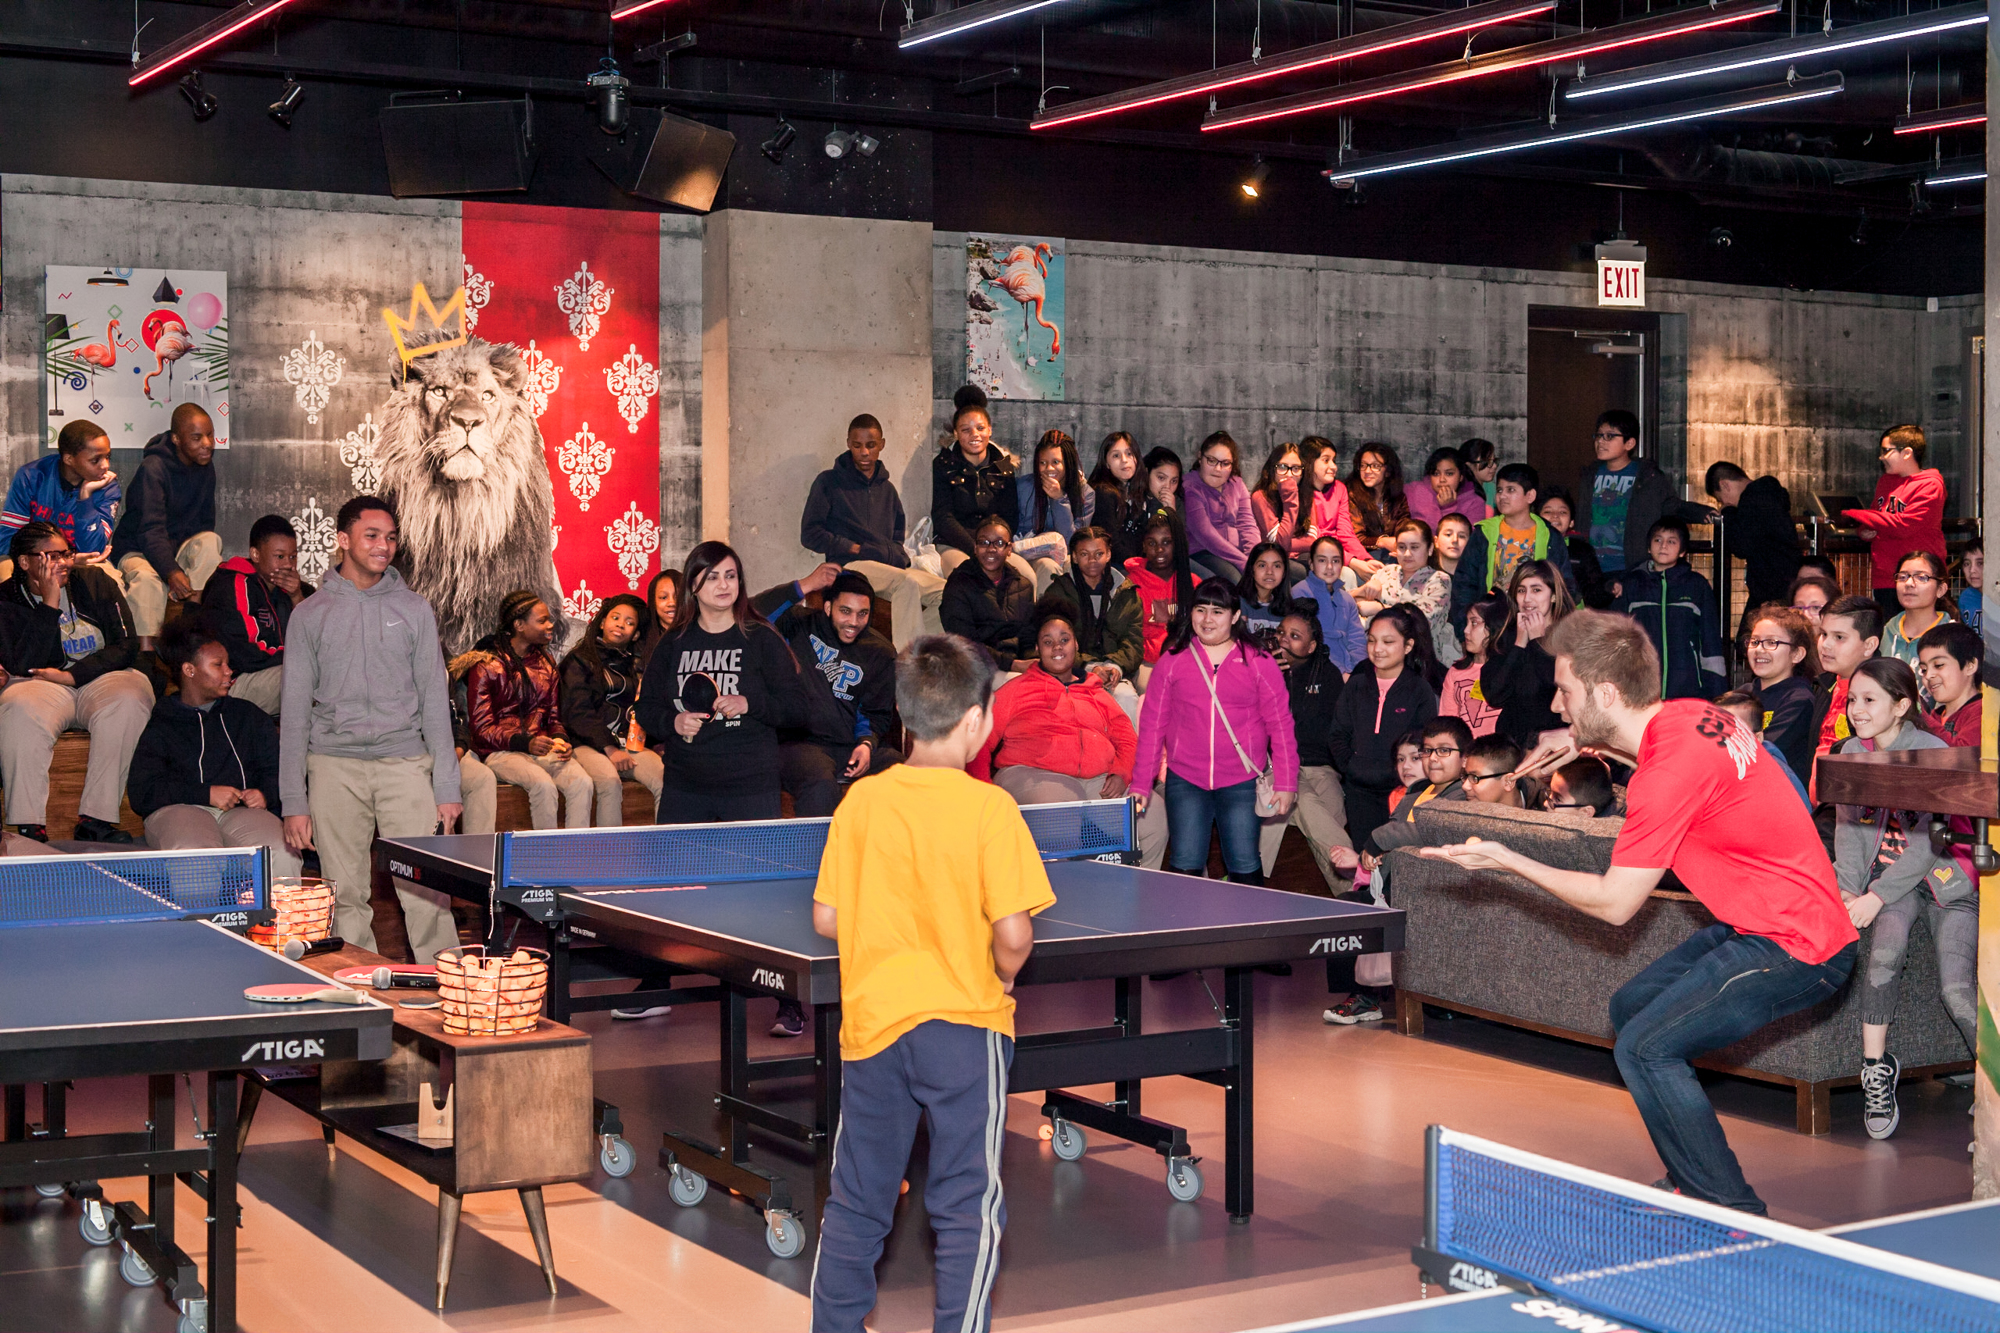 Kids take part in an event for World Table Tennis Day on April 6  at the SPiN pingpong club in Seattle.